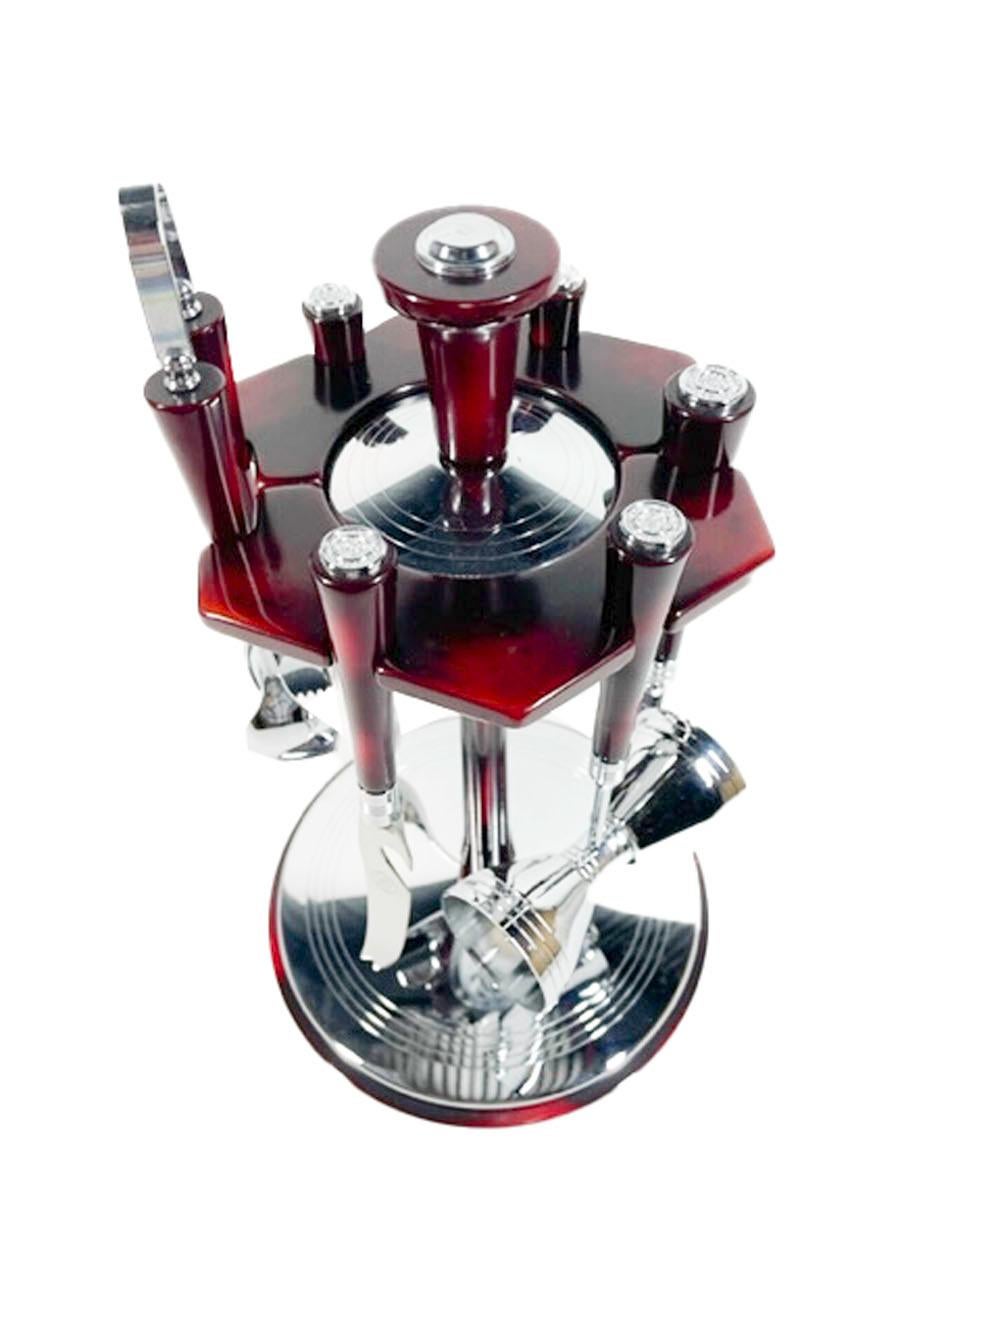 Six-piece bar tool set with revolving stand by Glo-Hill in red/black mottled faux tortoise Bakelite and chrome. A hexagonal Bakelite plate with cut-outs for the six tools is supported on a central column on a circular base.